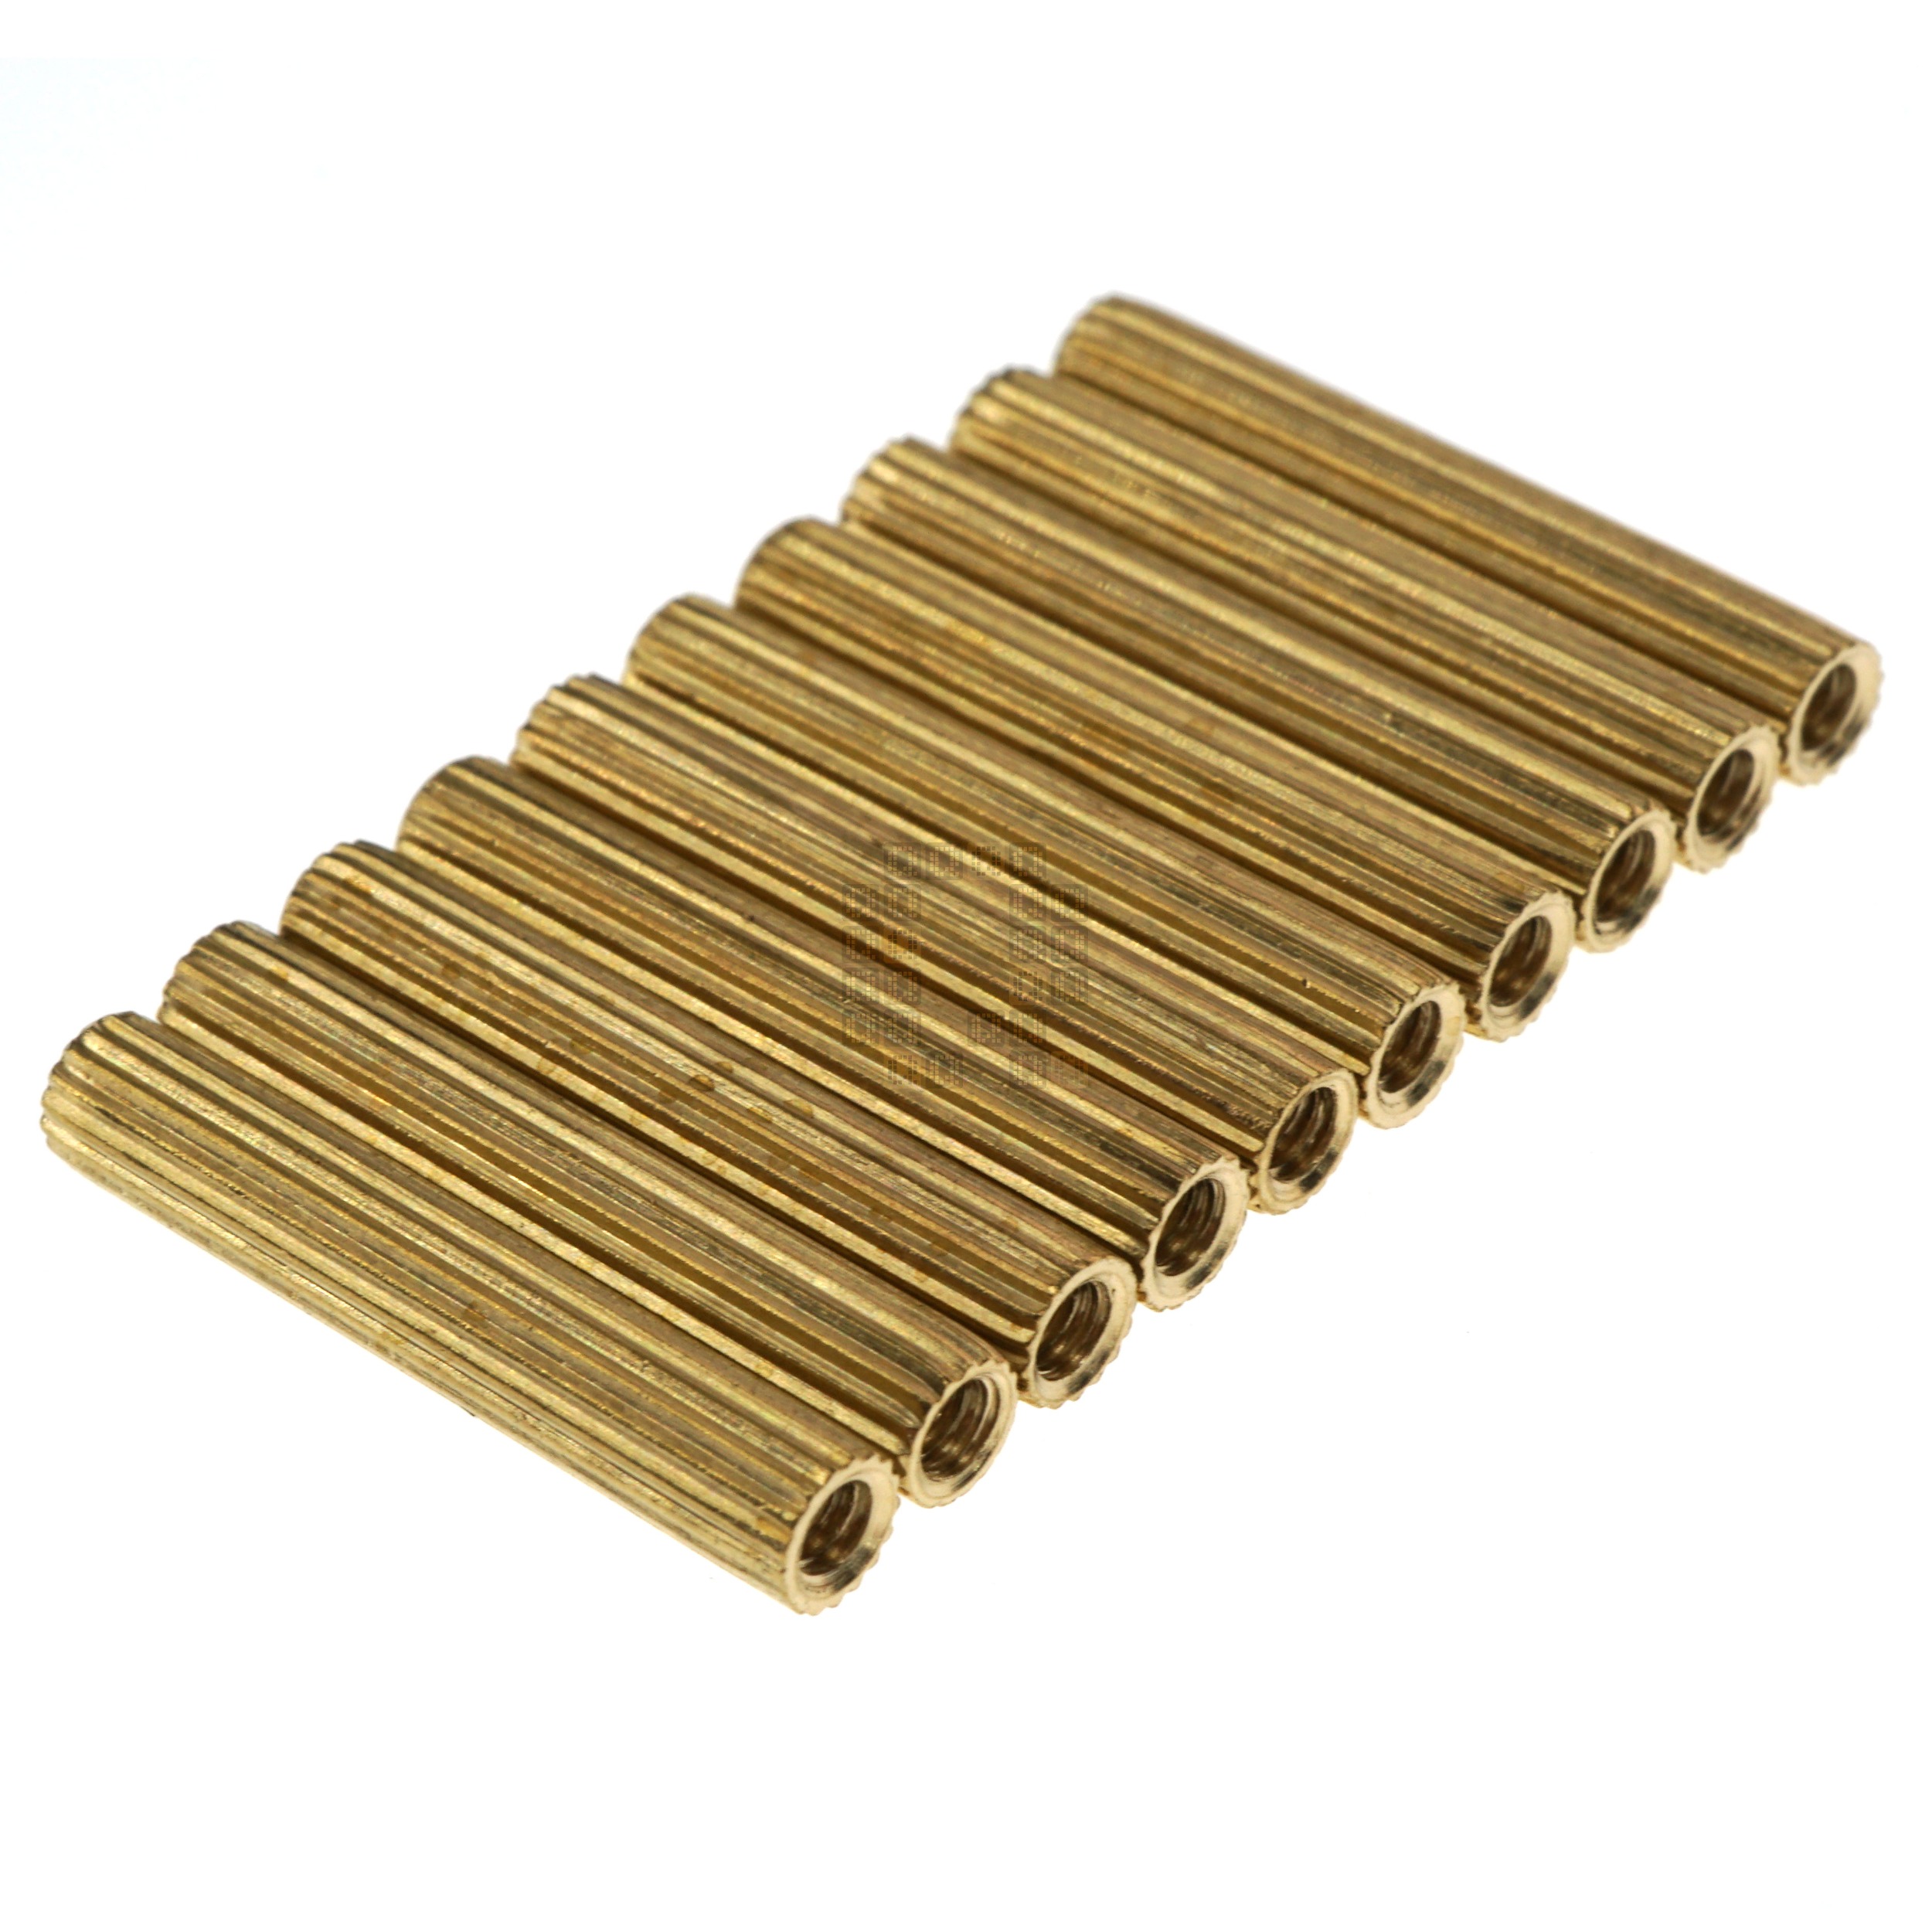 M2-0.40 x 18mm Brass Standoff, Female to Female, Knurled Outside, 10-Pack